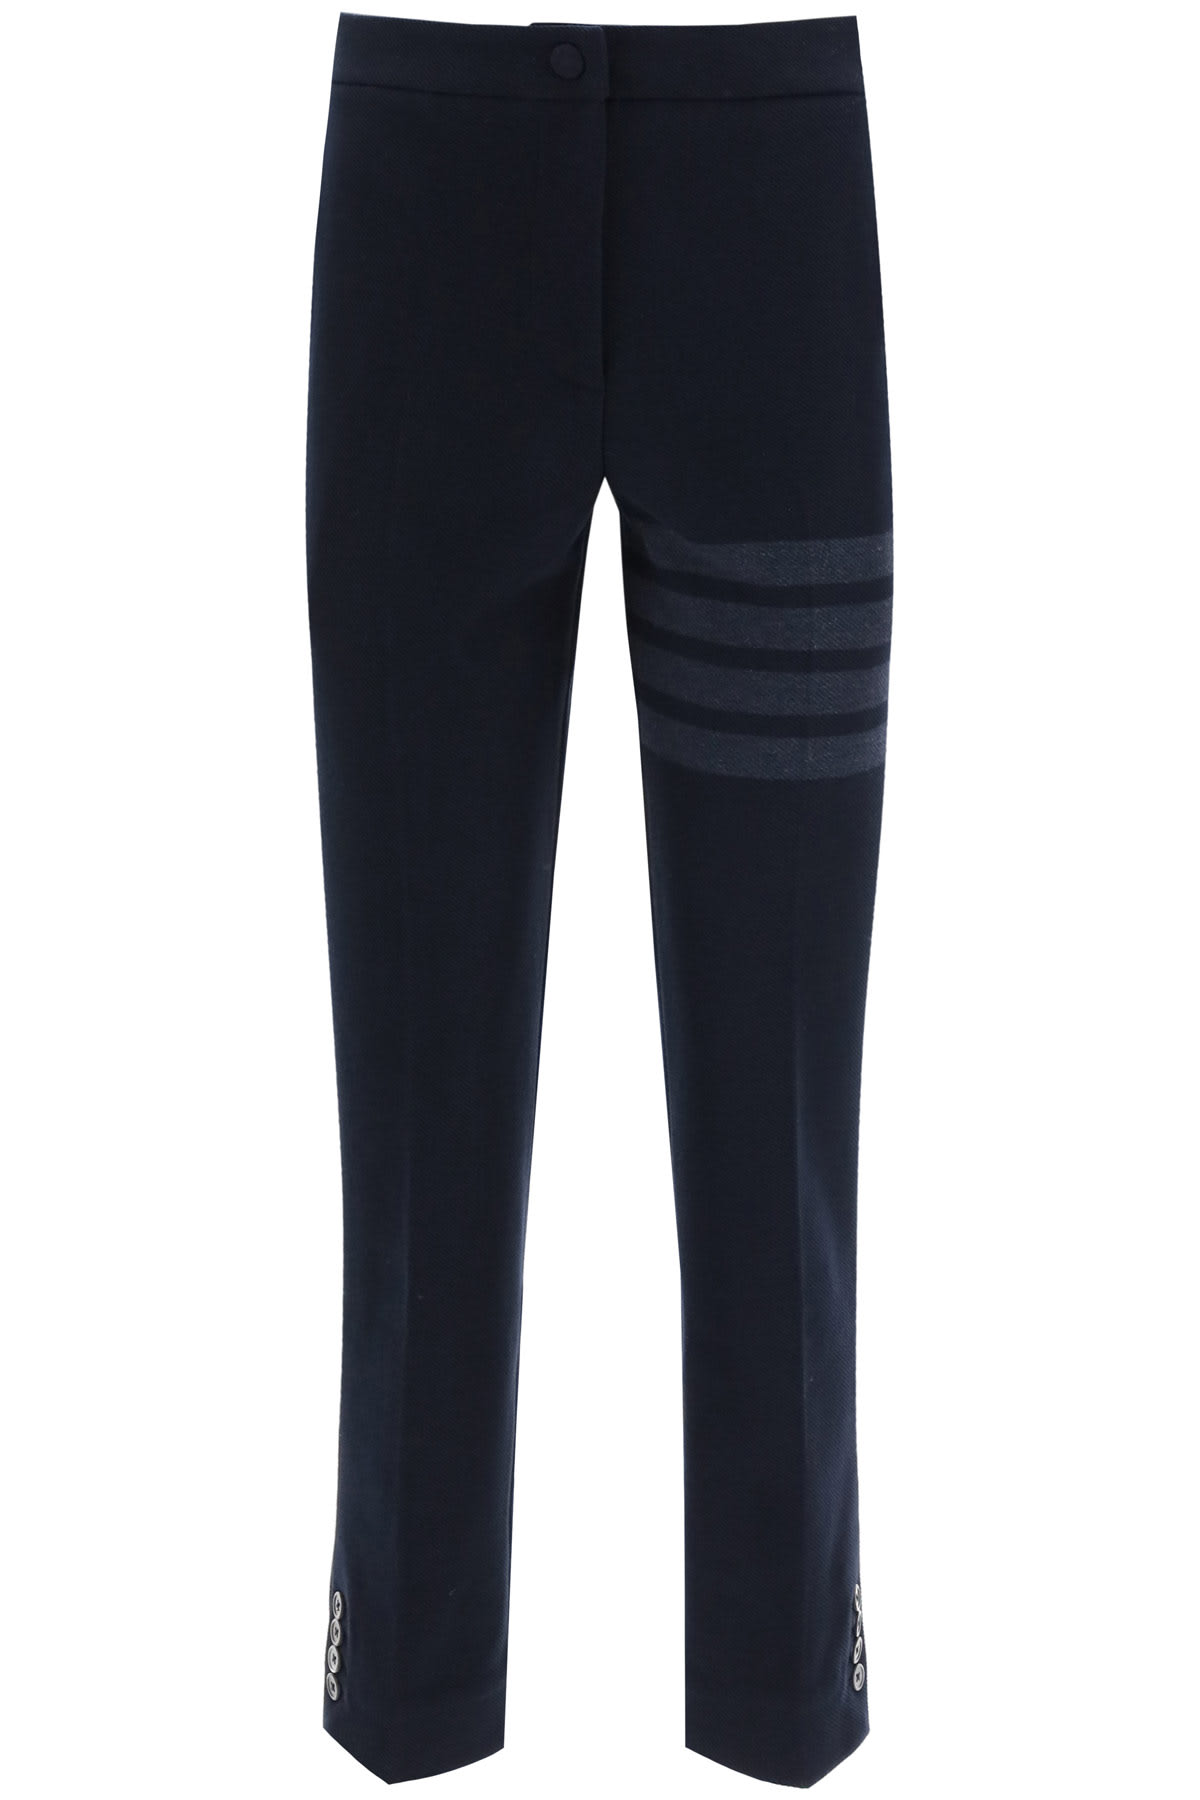 Thom Browne 4-bar Cotton Trousers